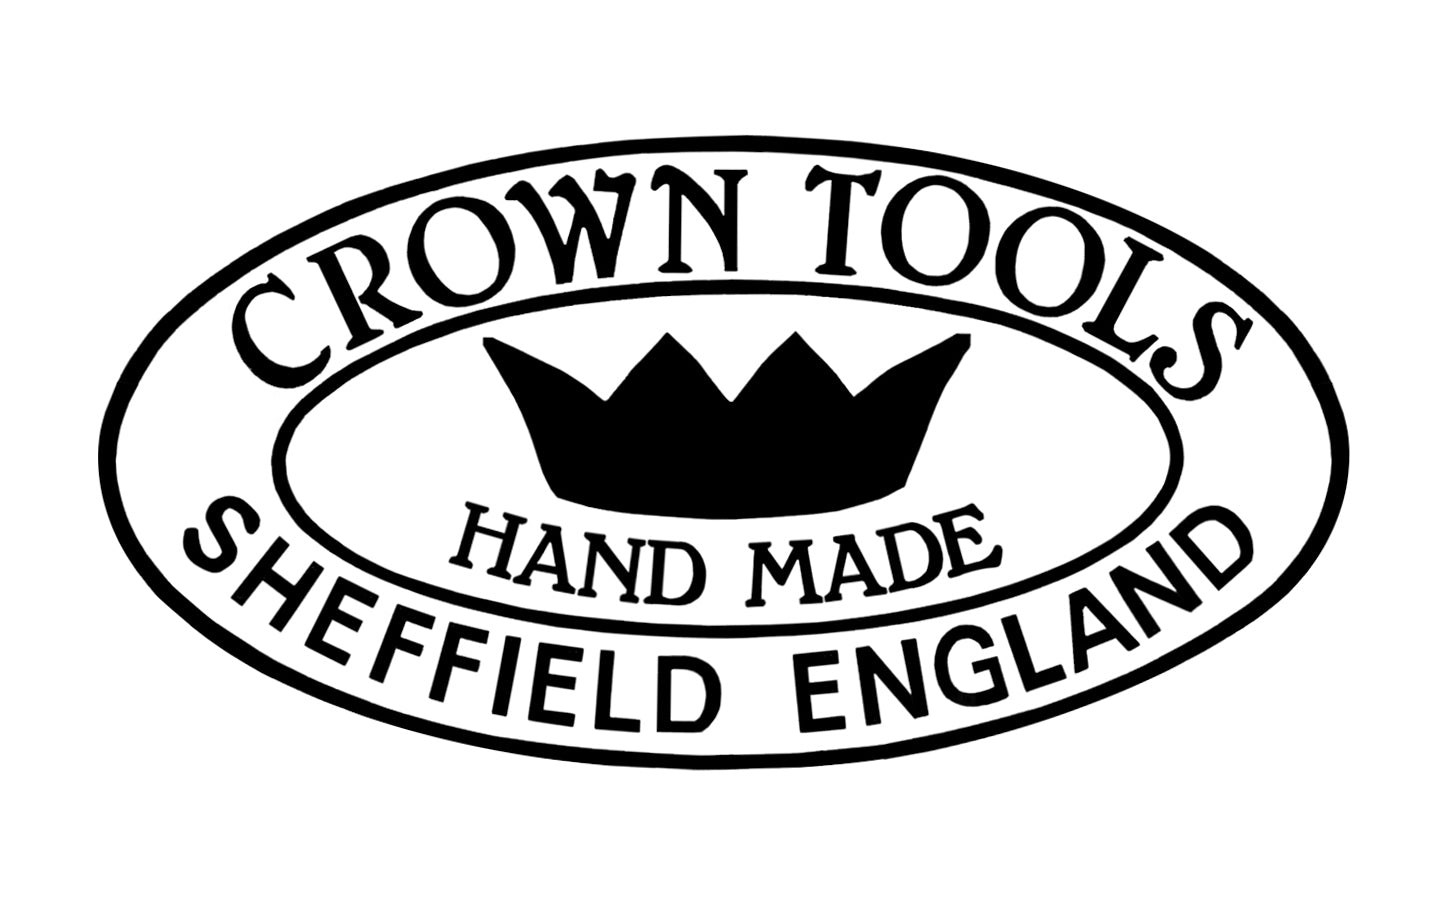 Crown Tools 1" (25 mm) Filing Knife with a flexible spring-tempered blade. High quality putty knife for filing holes, cracks, etc. Walnut wood handle. Made in Sheffield, England.